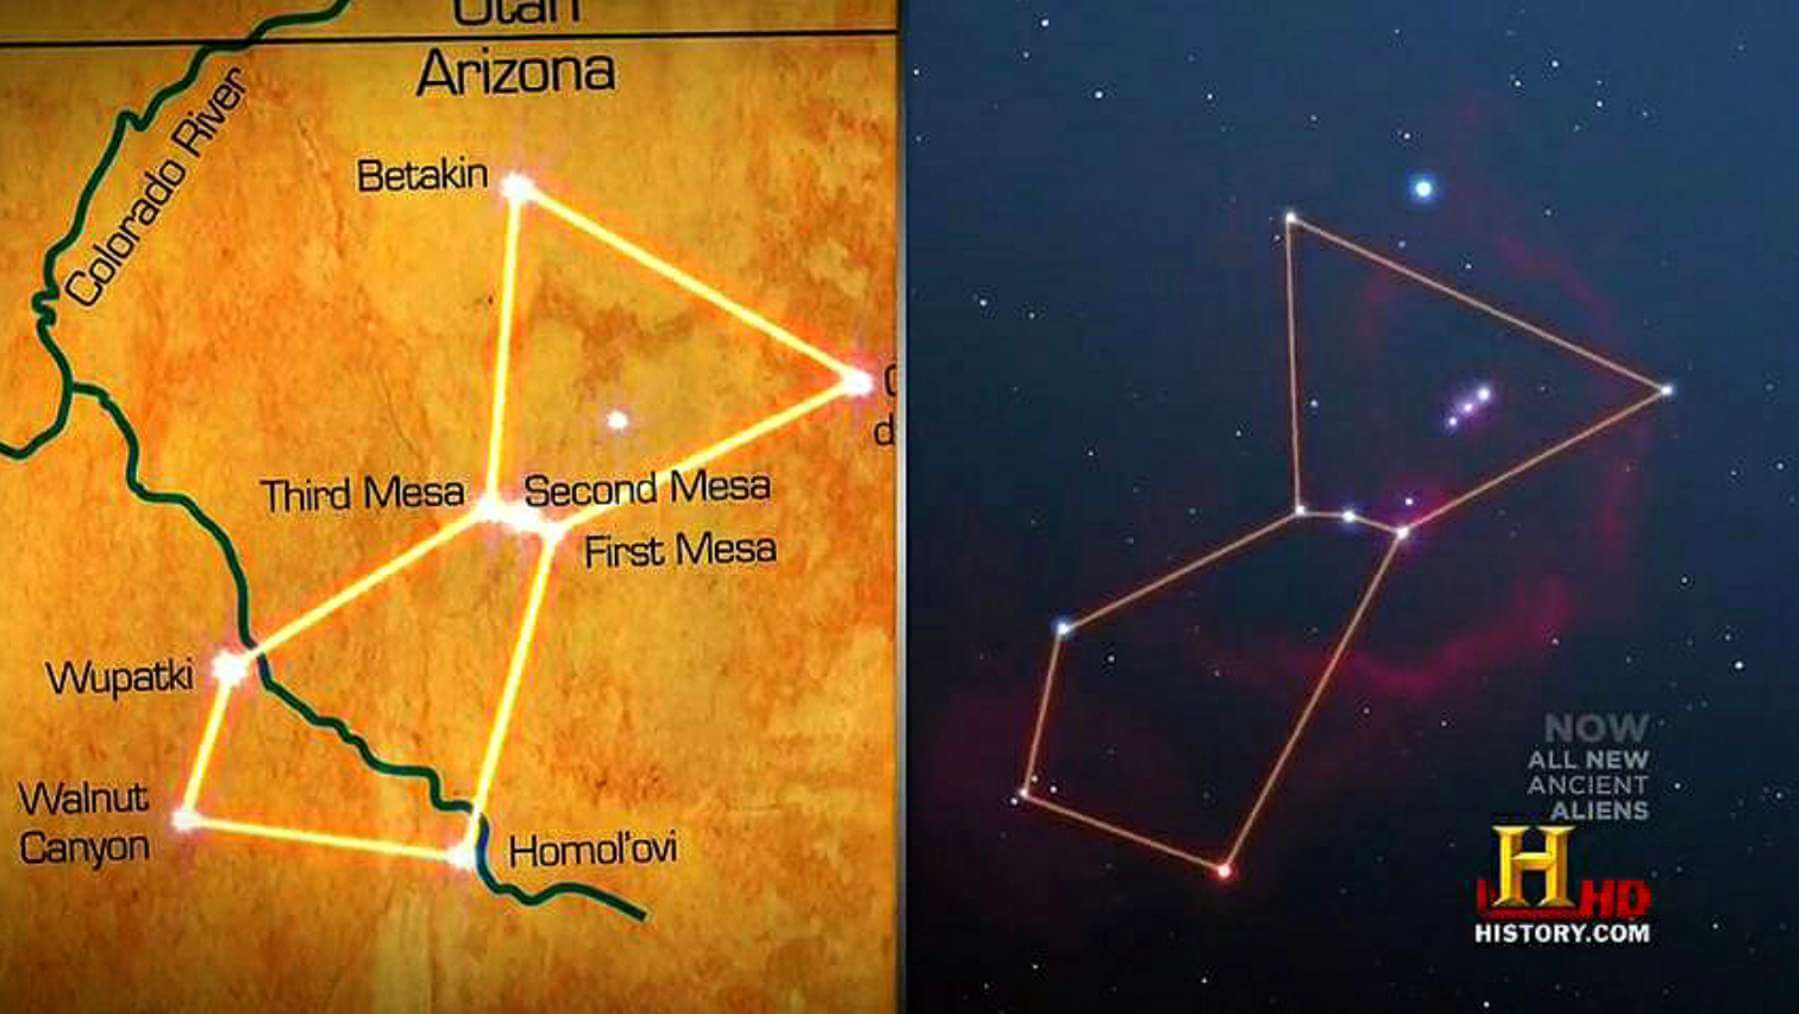 The three Hopi Mesas align perfectly with the constellation of Orion ©History.com